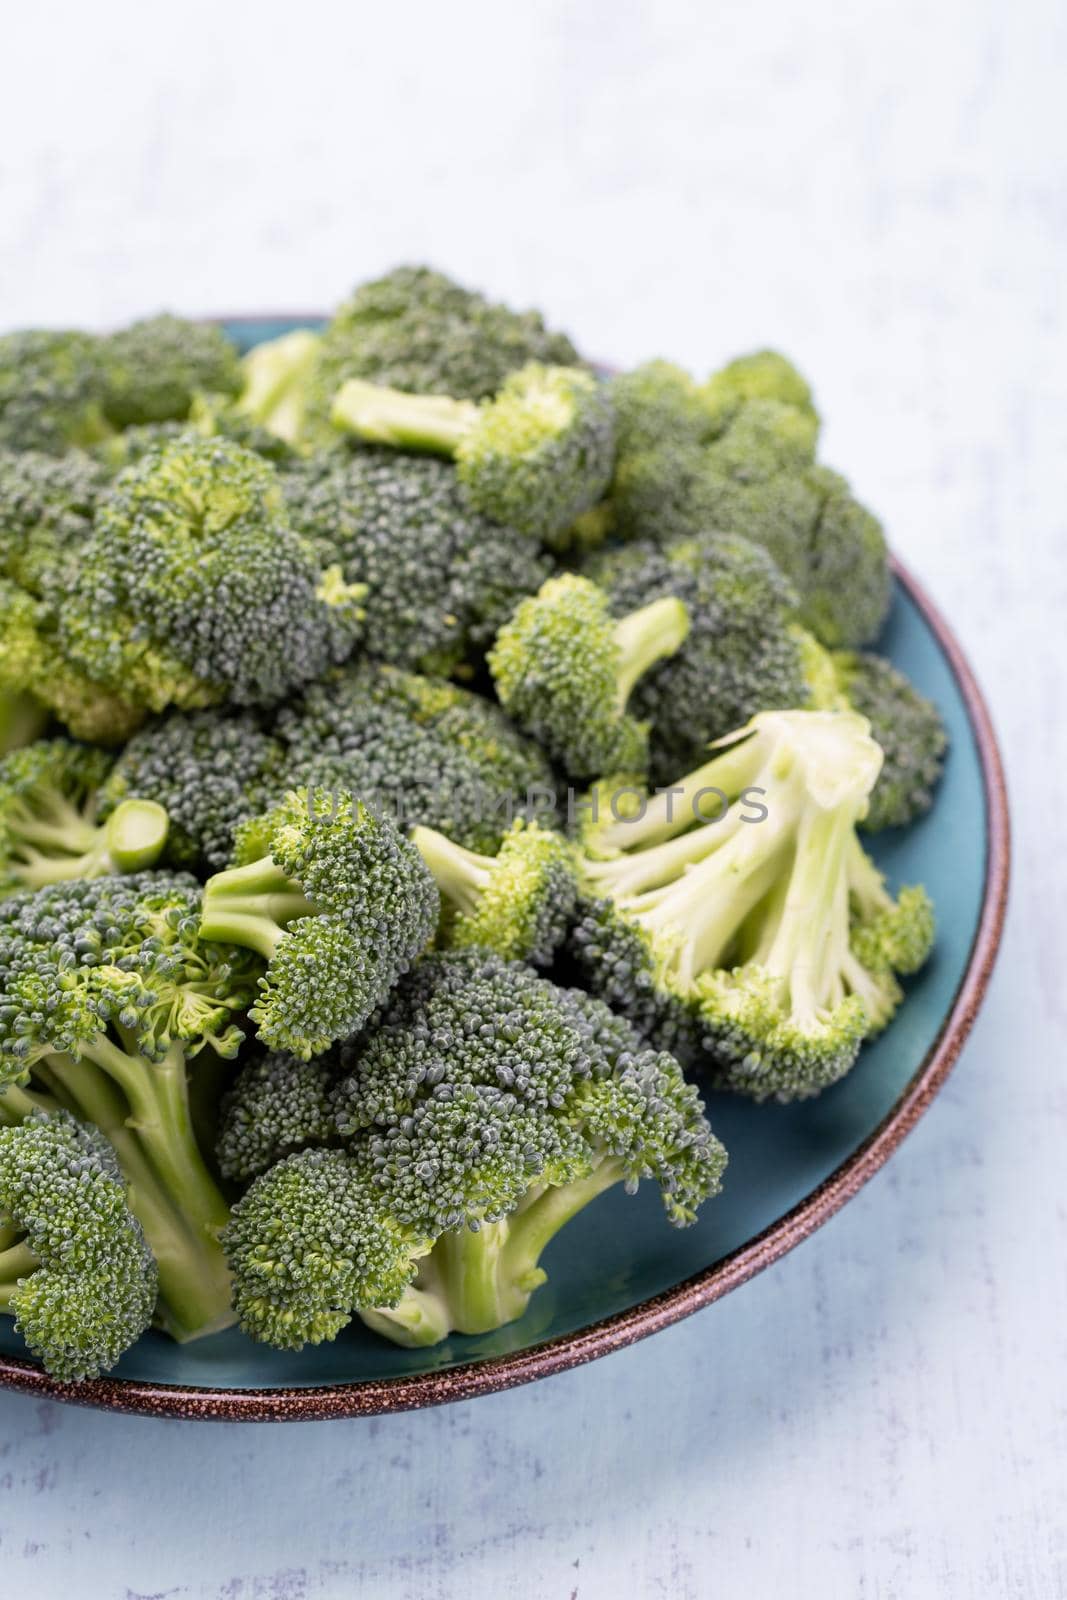 Healthy Green Organic Raw Broccoli Florets Ready for Cooking by gitusik